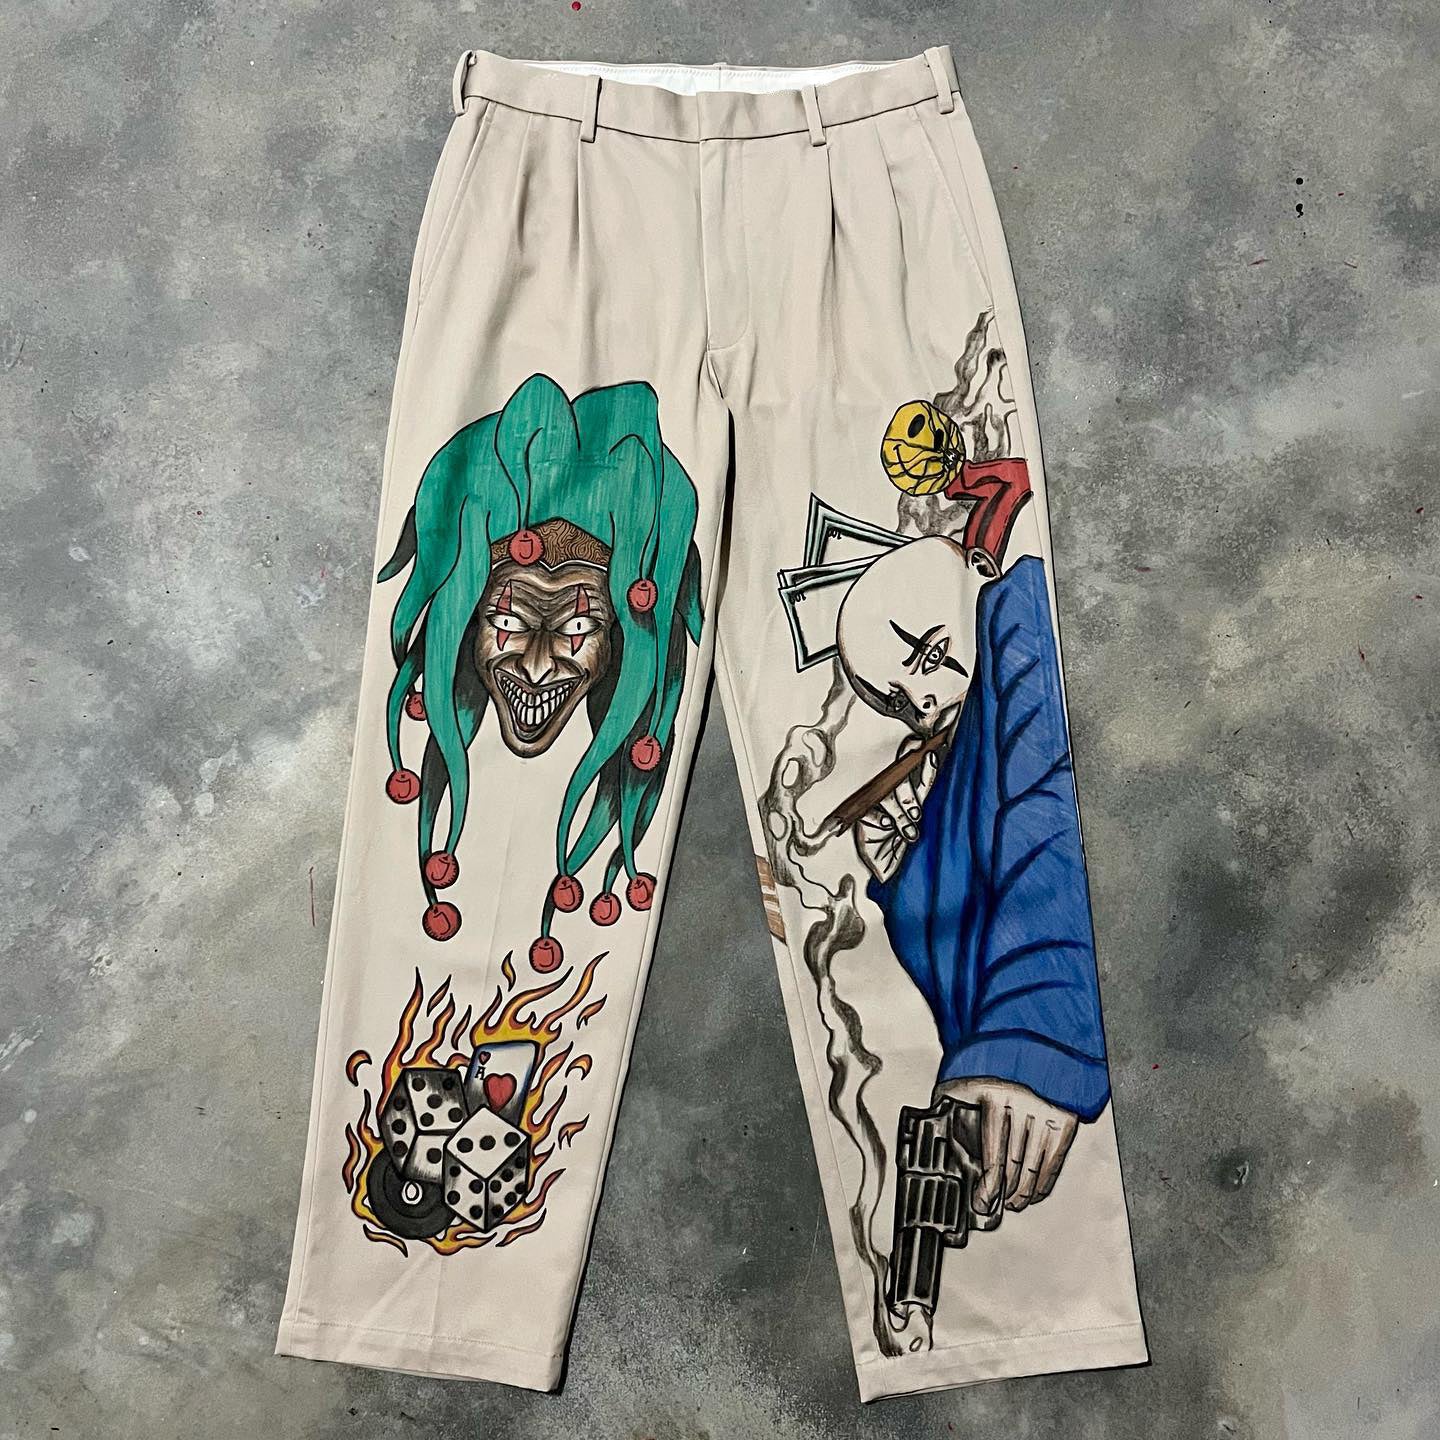 Casual street hand drawn illustration trousers jeans